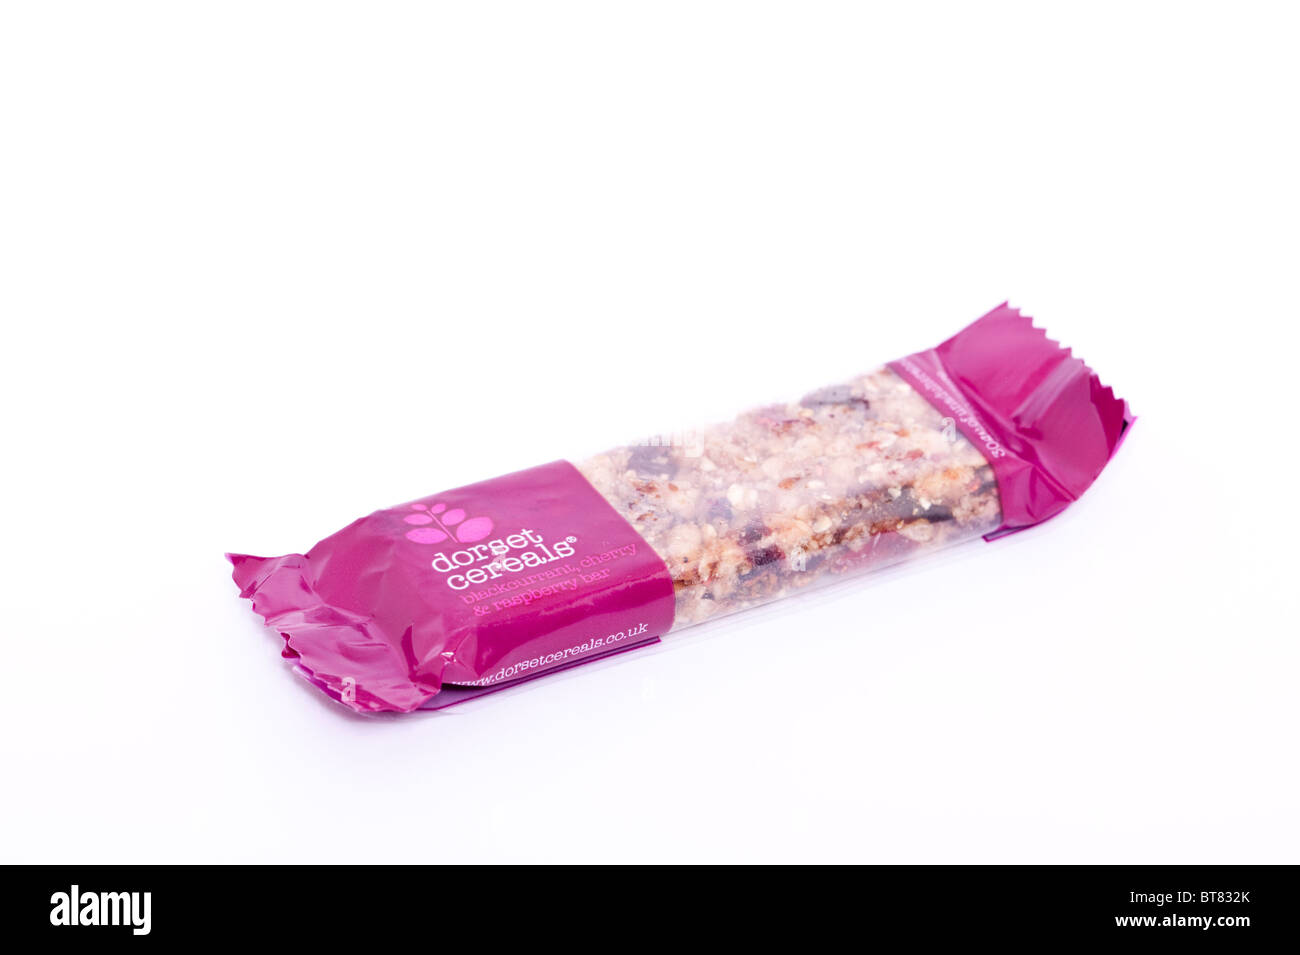 A close up photo of a dorset cereals muesli cereal bar against a white background Stock Photo